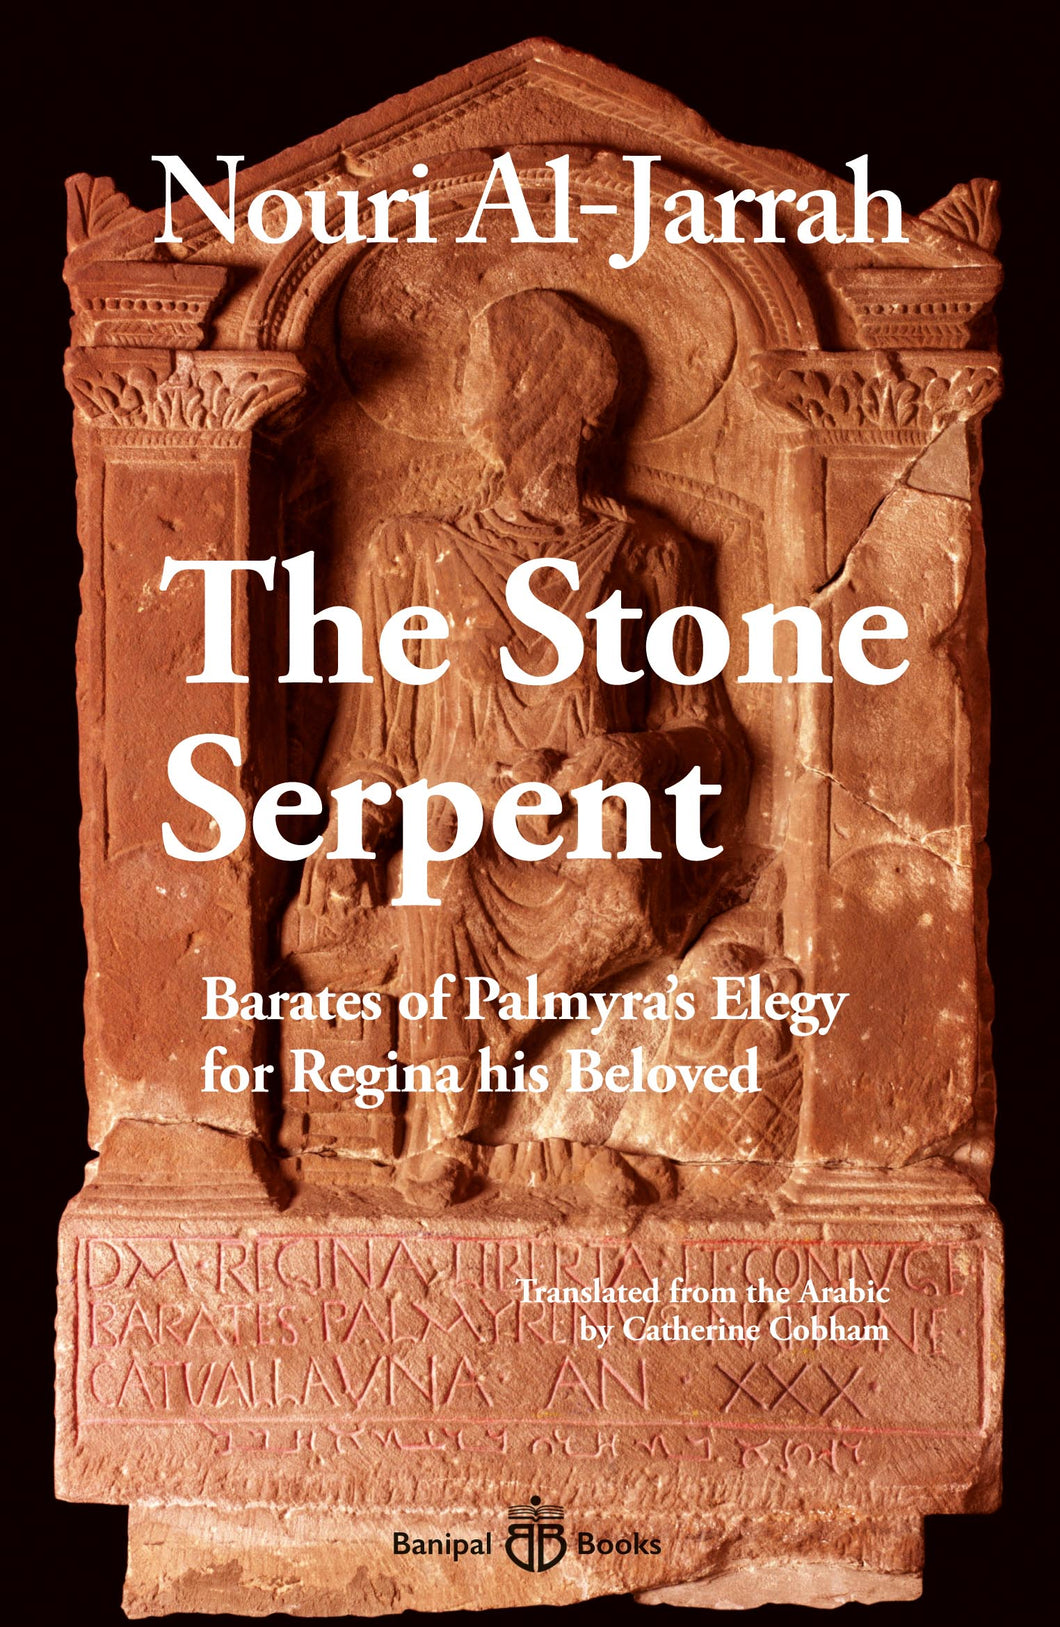 The Stone Serpent: Barates of Palmyra's Elegy for Regina his Beloved